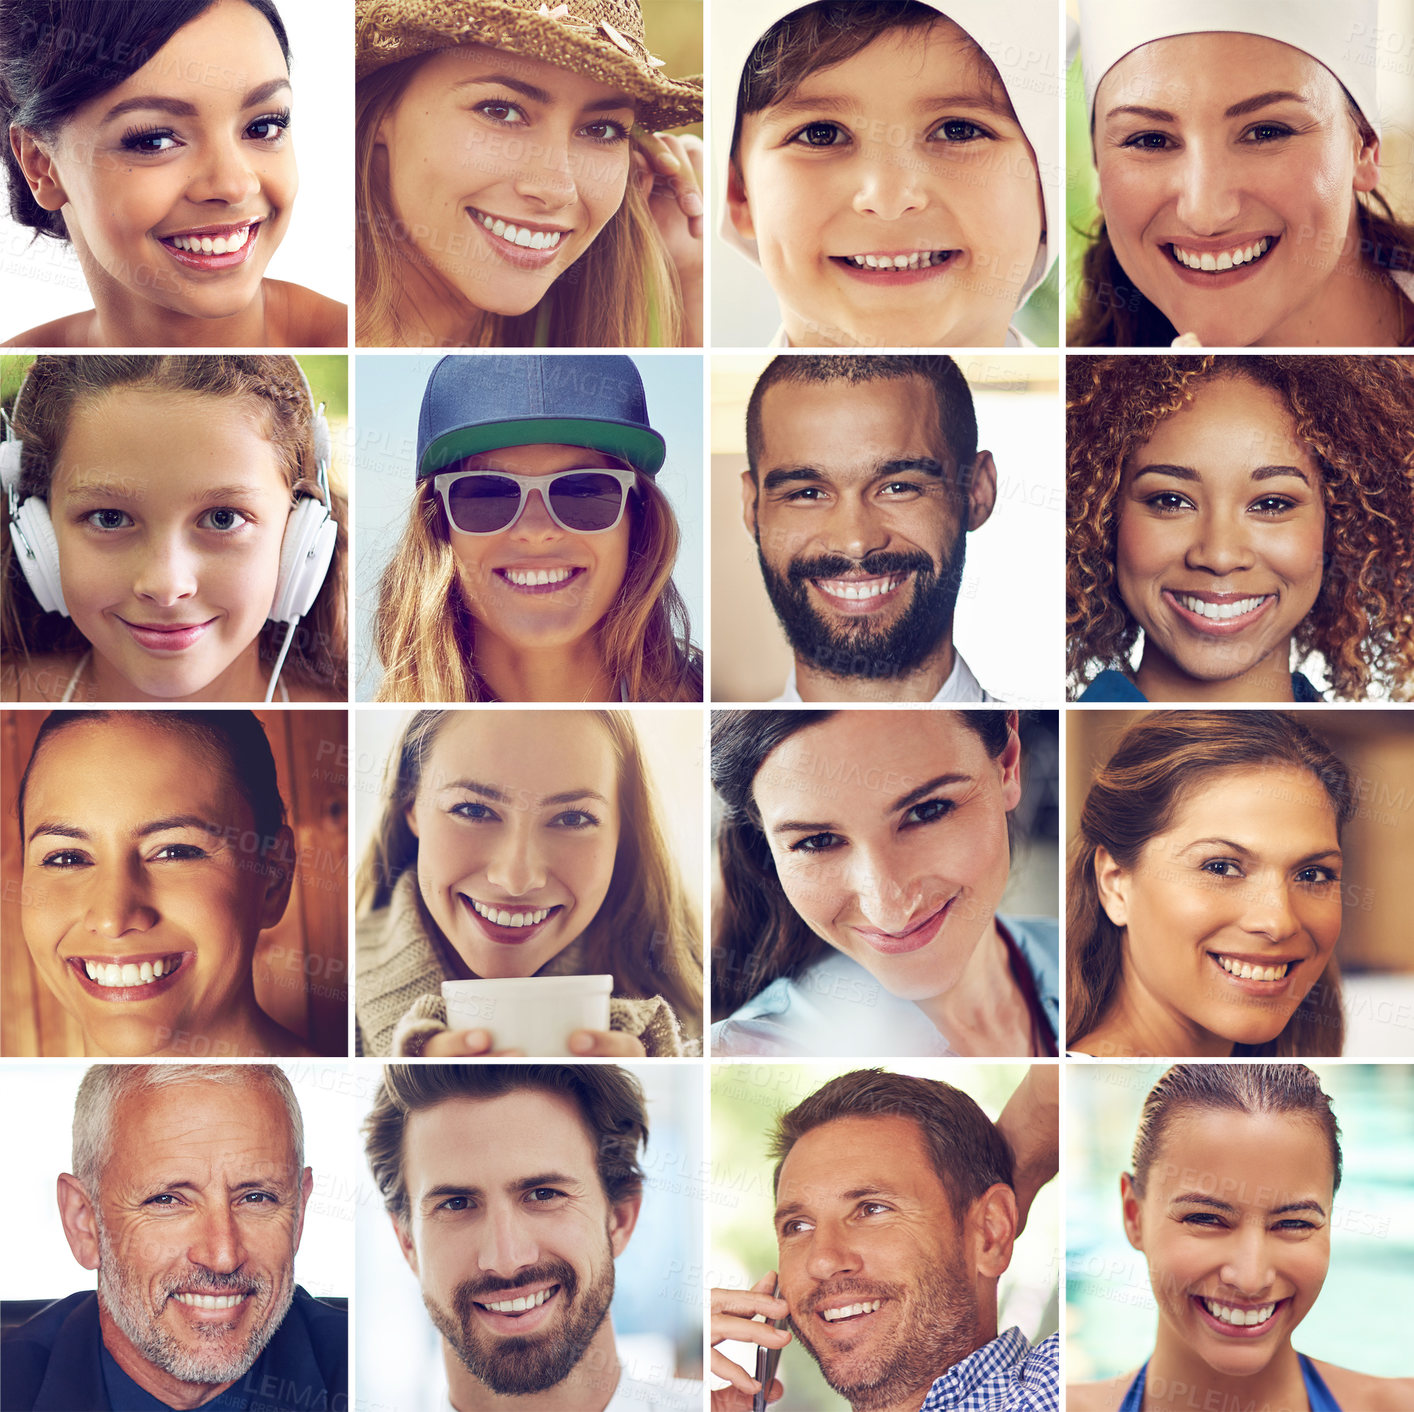 Buy stock photo Composite image of a diverse group of smiling people